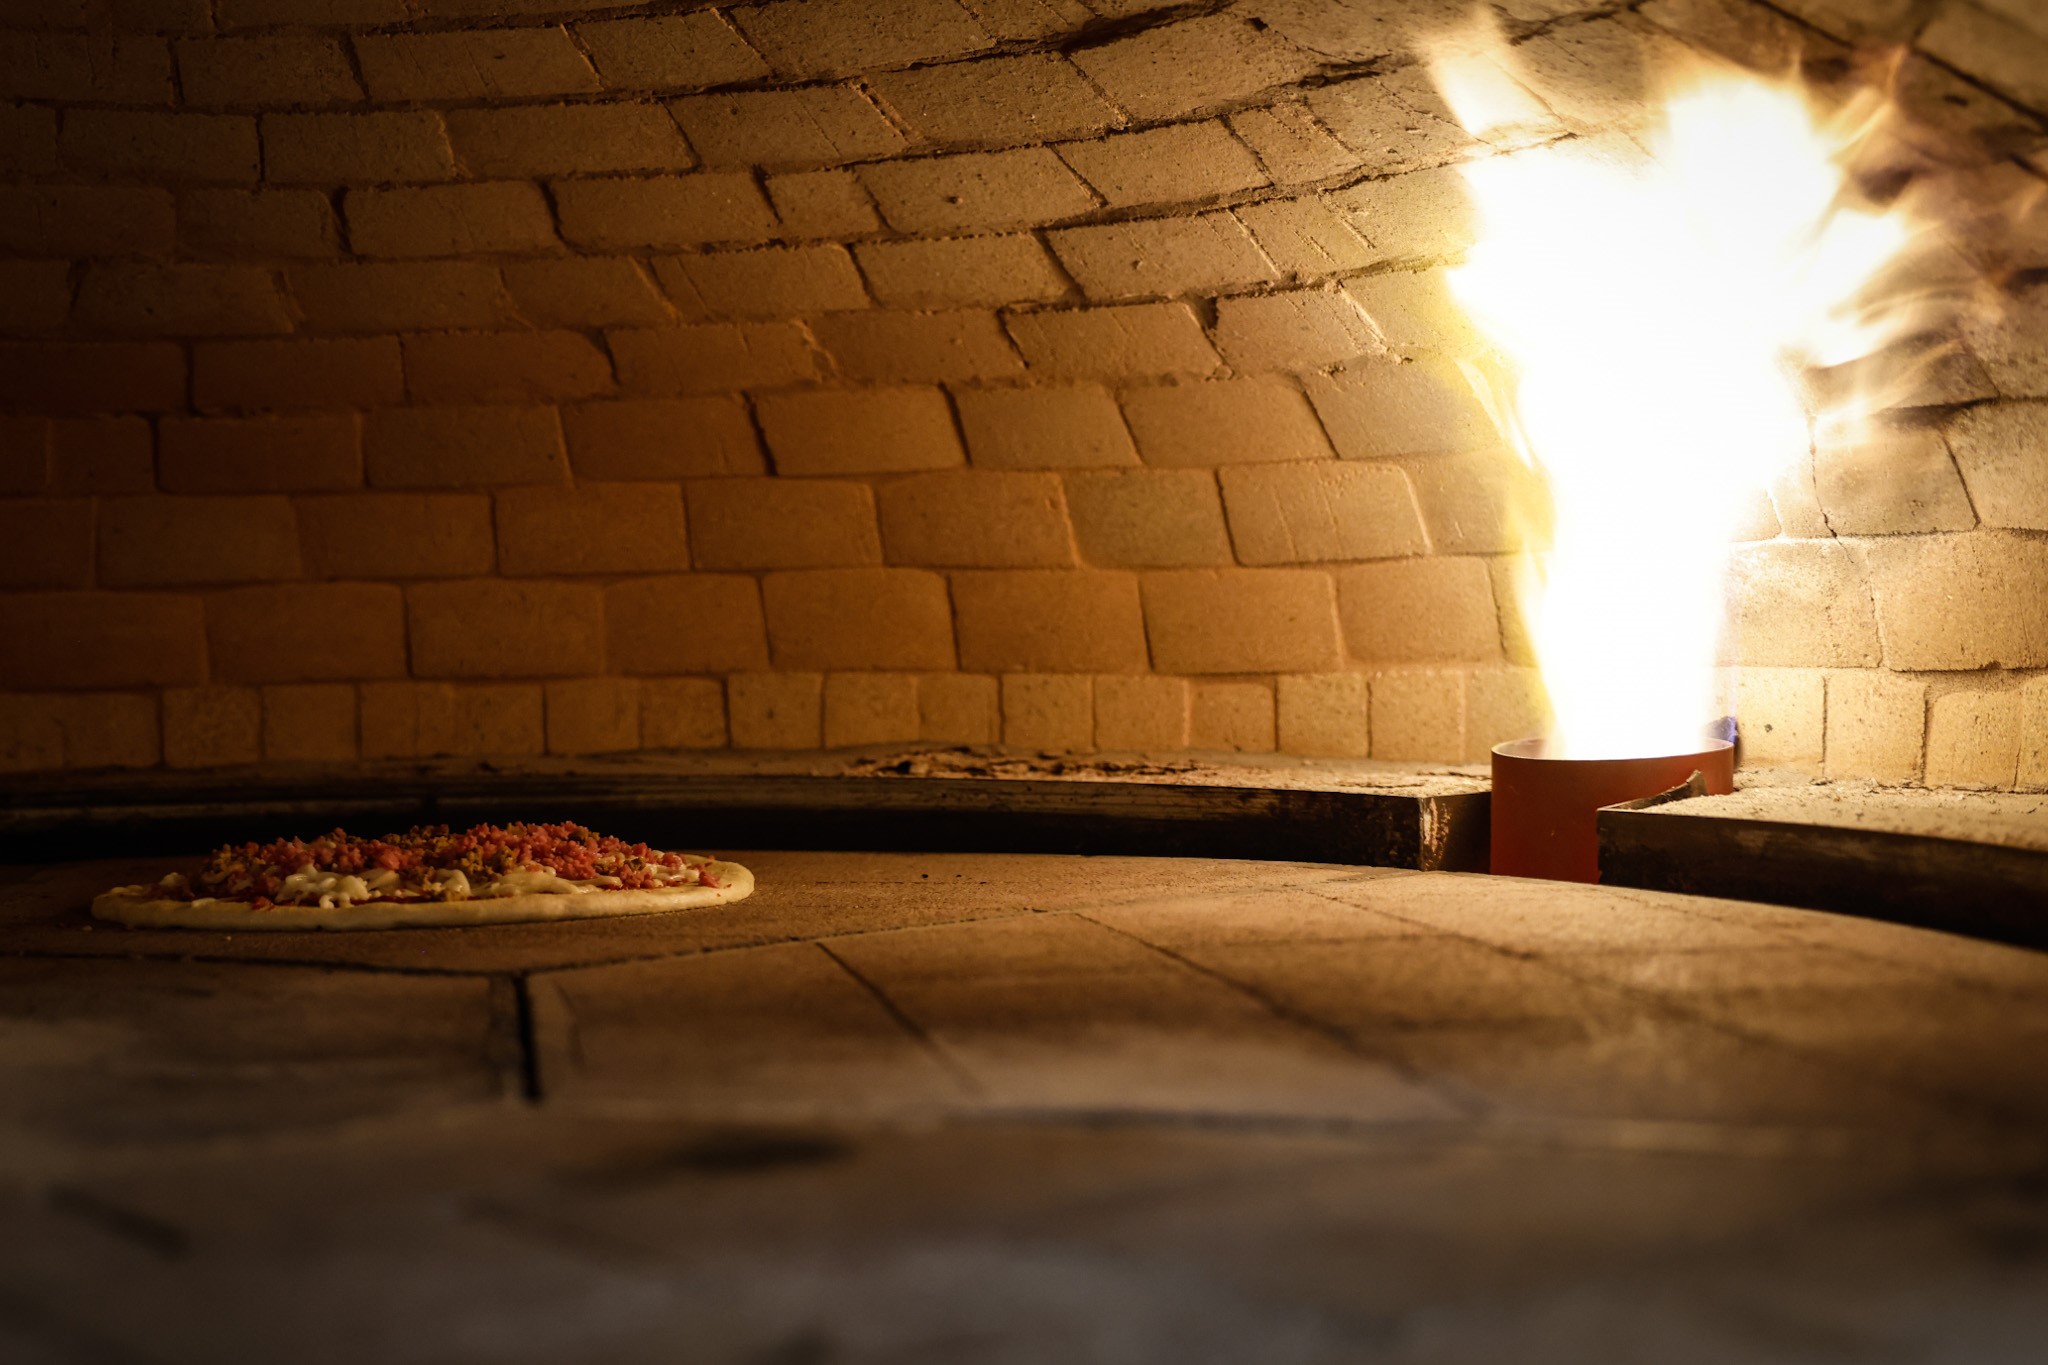 ILLY'S Fire Pizza features an open fire oven where Kelly and Robert Gunn make pizza at West Social Tap & Table located at 1100 West Third St. in Dayton. JIM NOELKER/STAFF